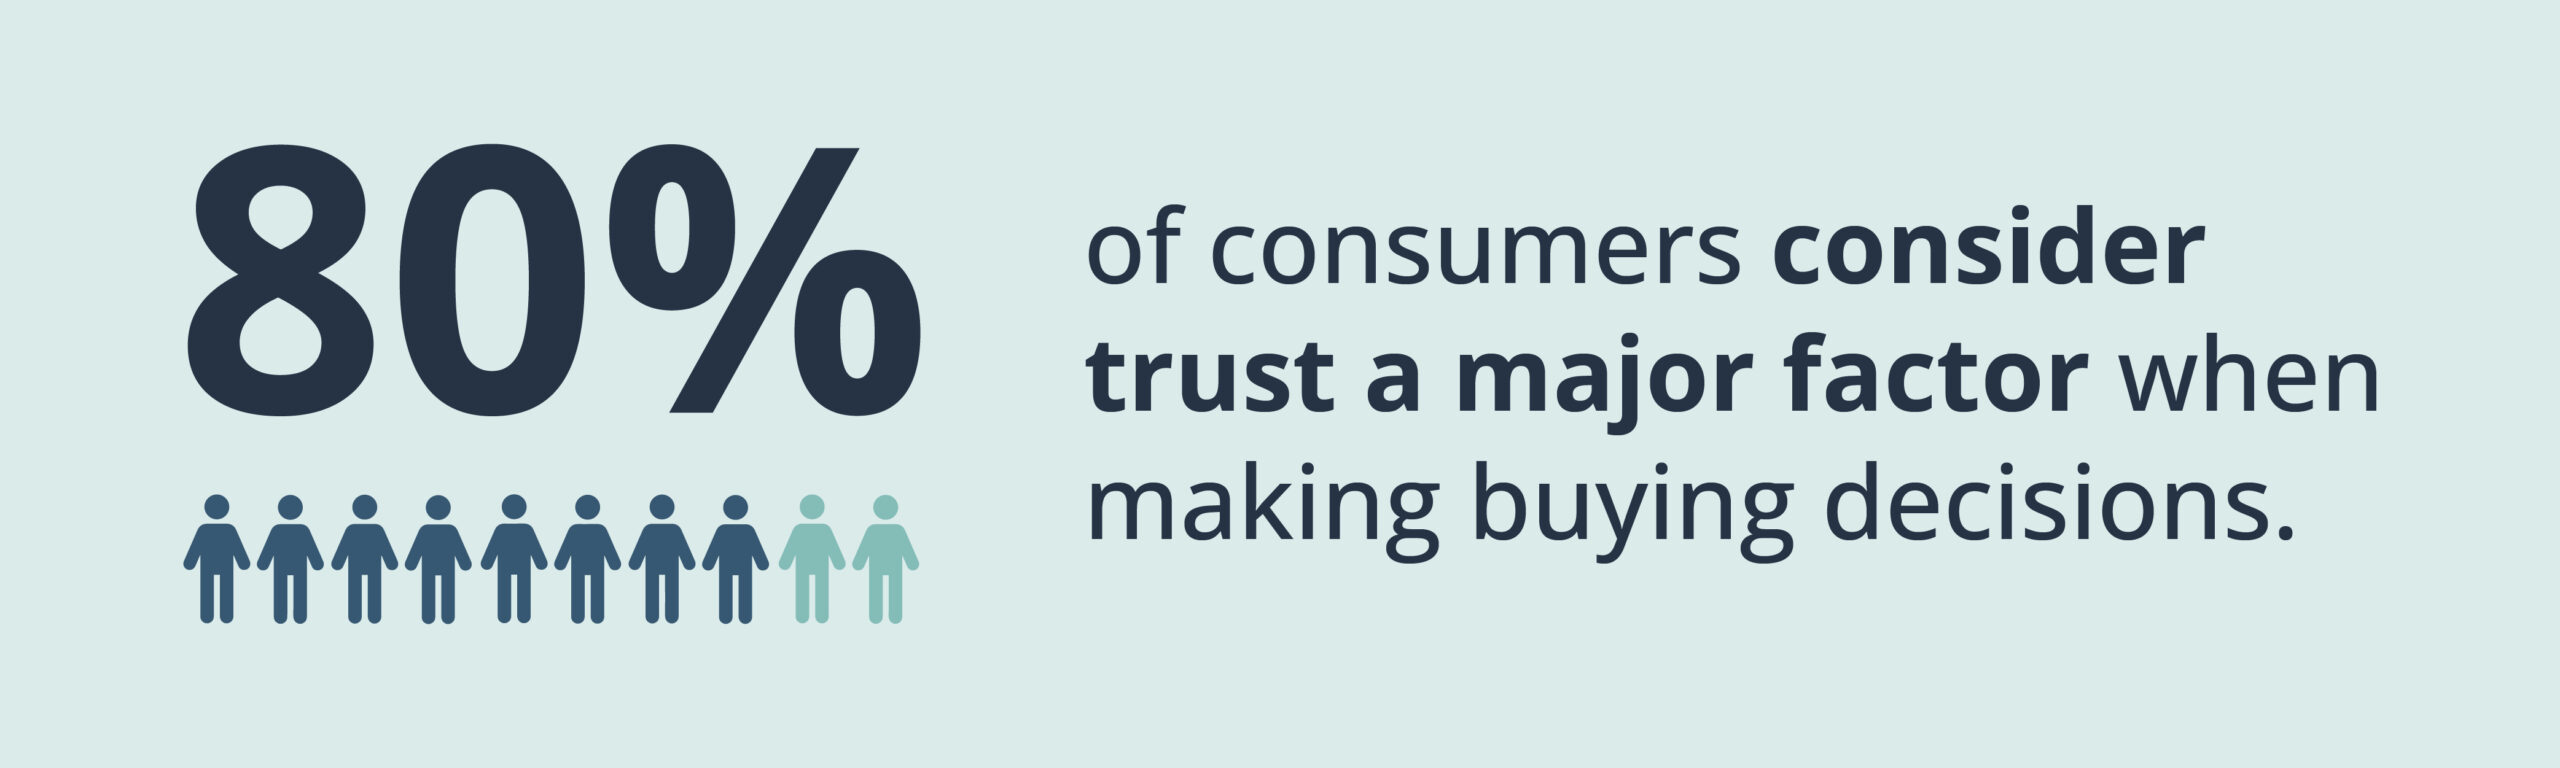 80% of consumers consider trust a major factor when making buying decisions.